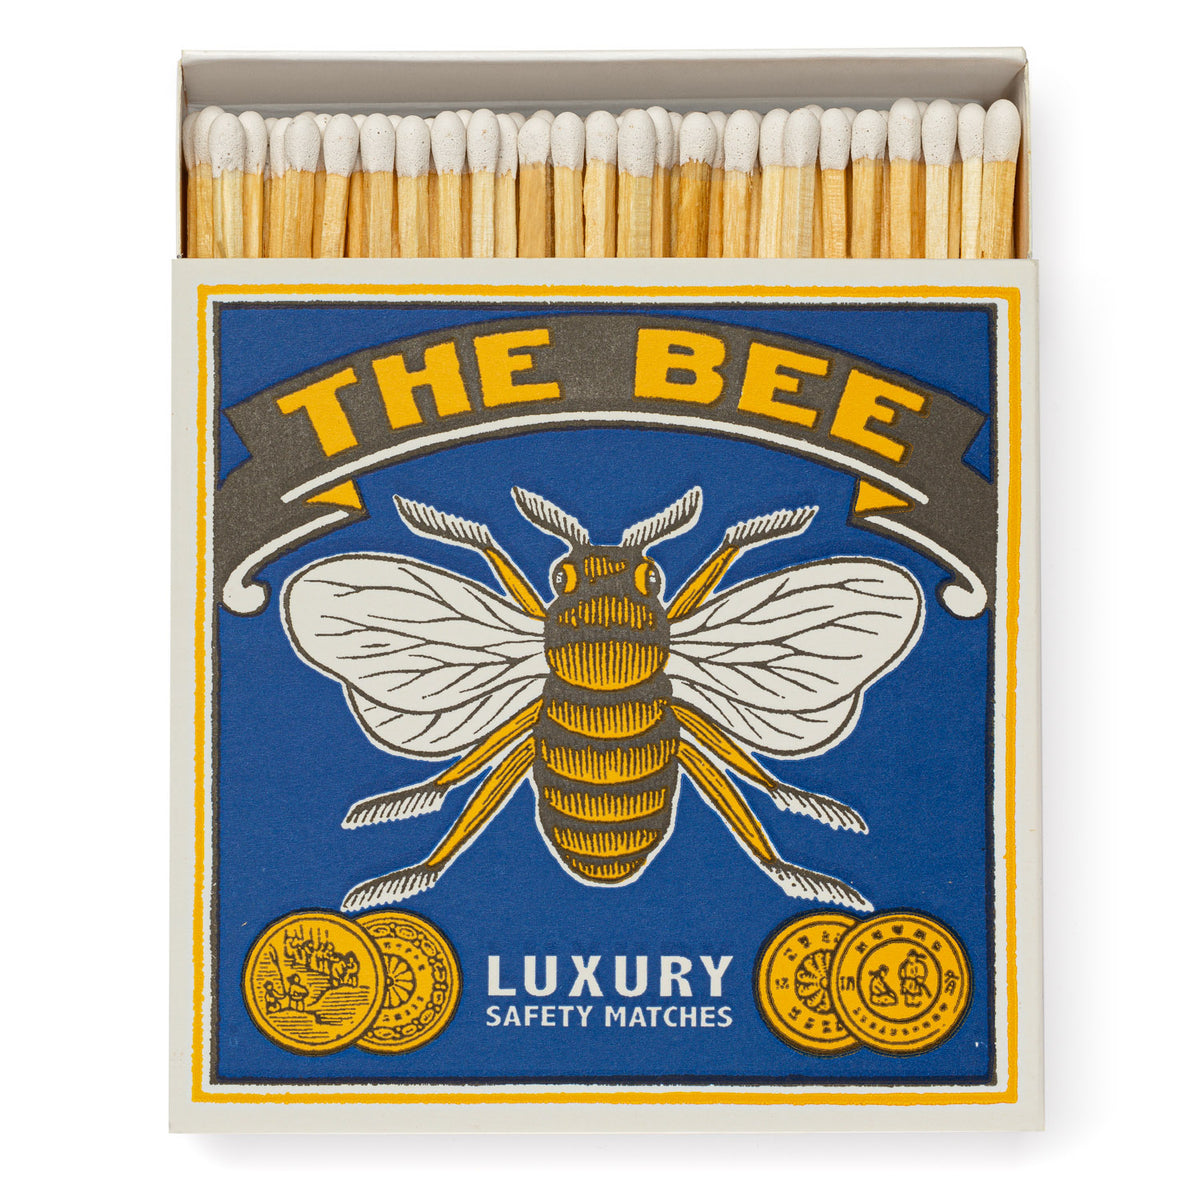 The Archivist Bee Luxury Safety Matches